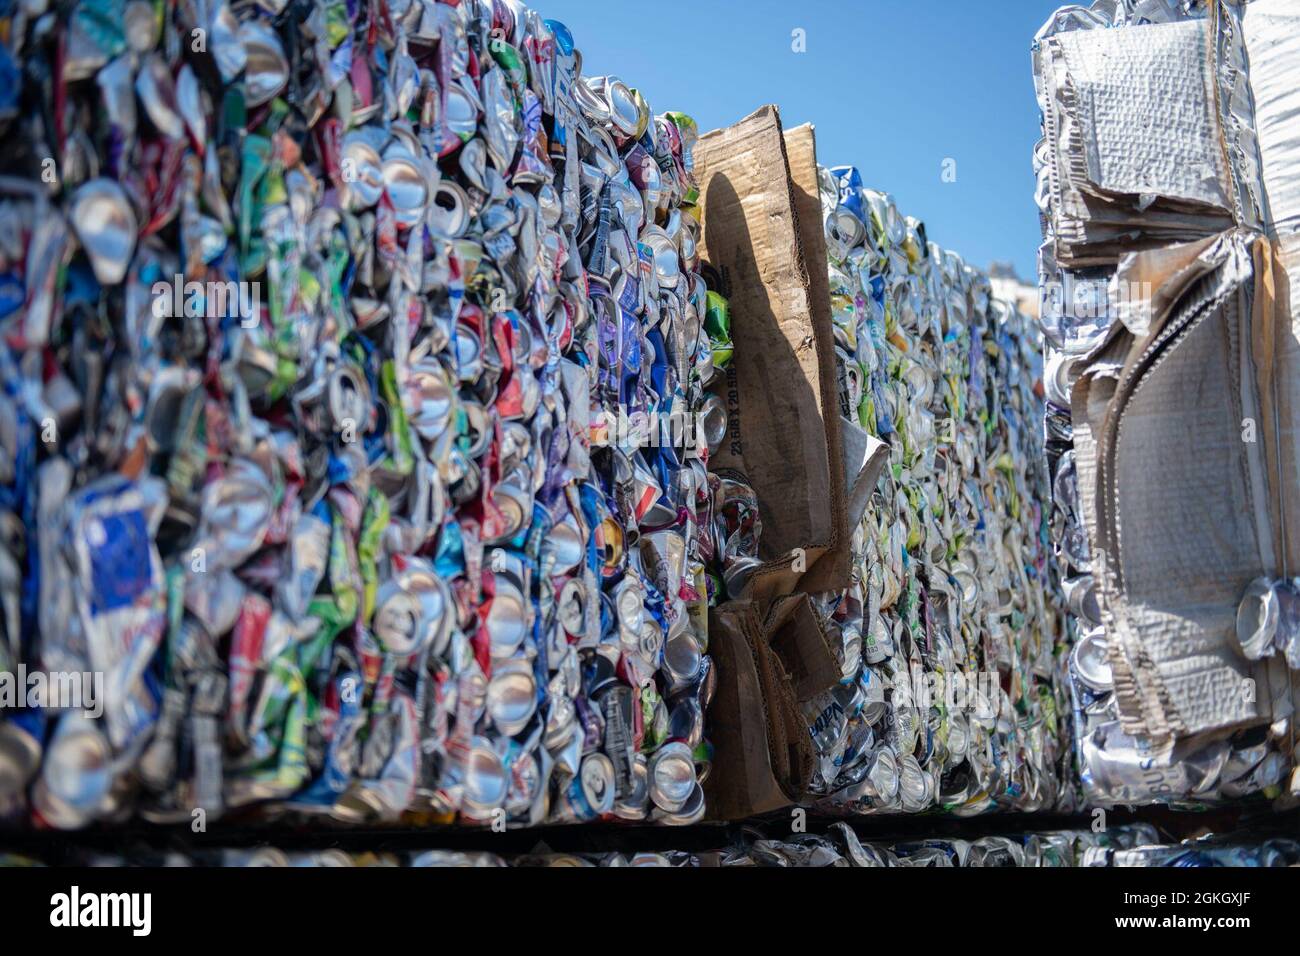 Pictured are stacks of crushed aluminum cans waiting to be recycled at Tyndall Air Force Base, Florida, April 19, 2021. The recycling center at Tyndall collects and distributes recyclable materials to various recycling brokers in the community in attempt to reduce the amount of solid waste being put into local landfills. Stock Photo